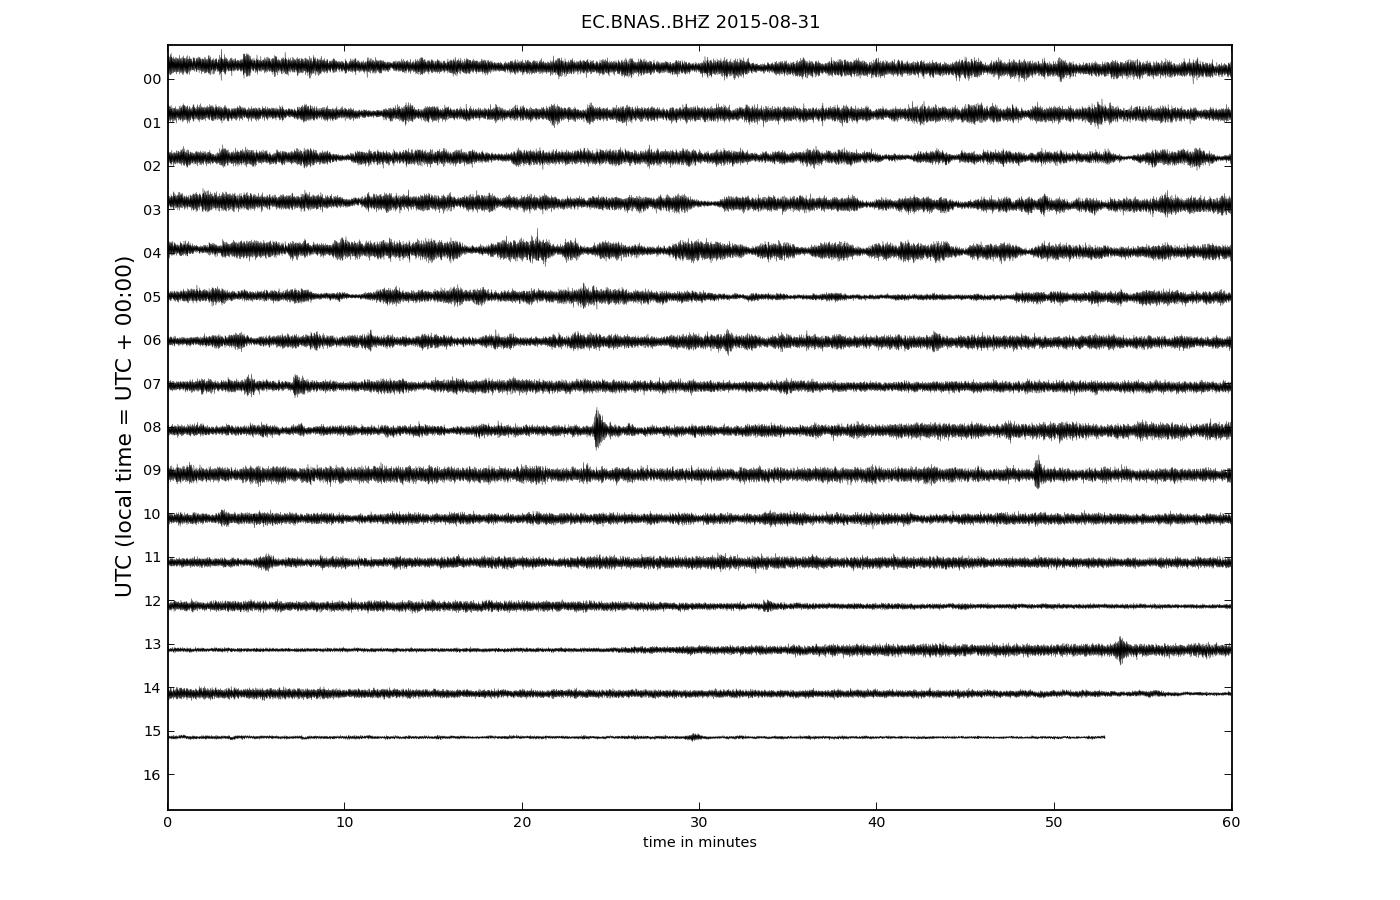 Current seismic trace (BNAS station)